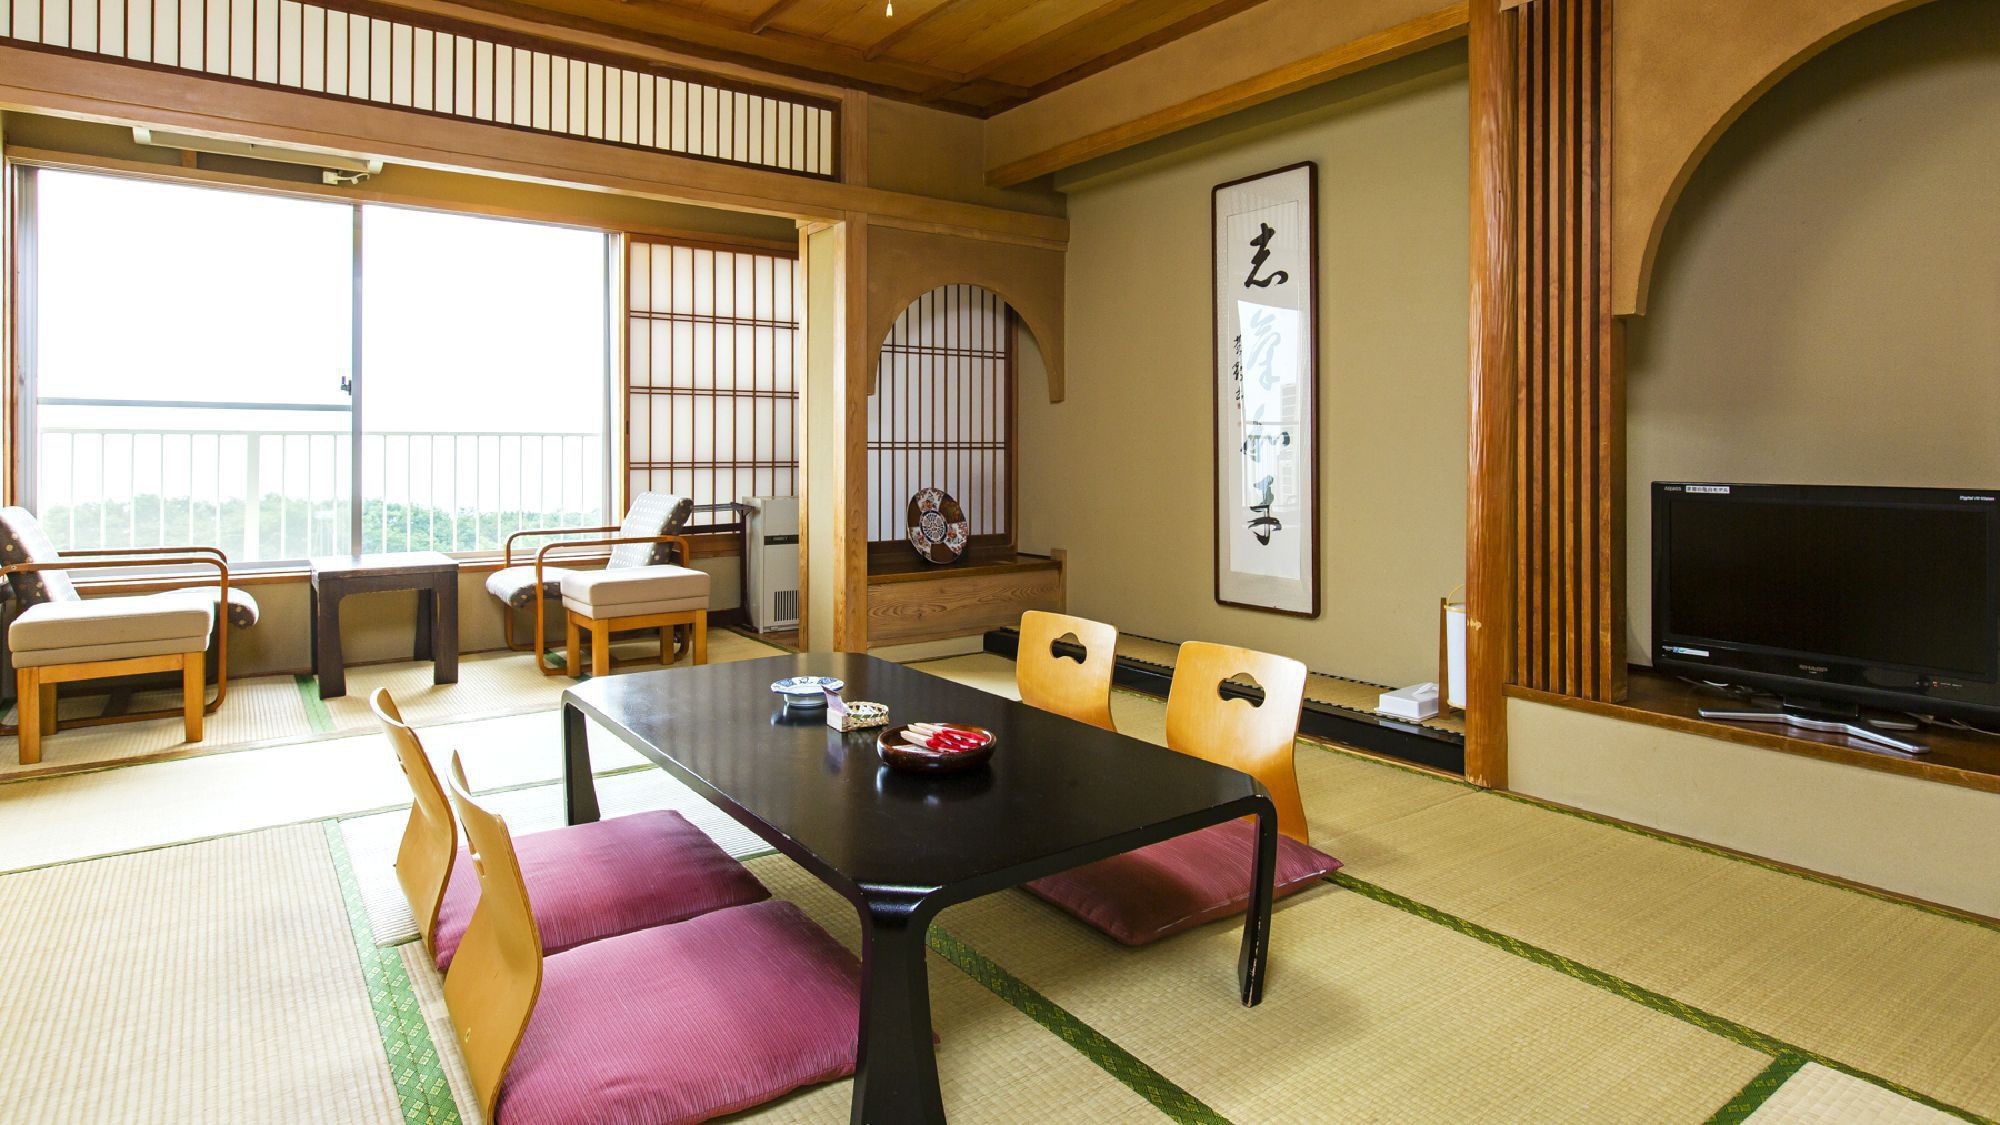 ◇ [Main Building] 10 tatami mats (example) / Japanese-style room in the main building, which is popular with families and elderly customers